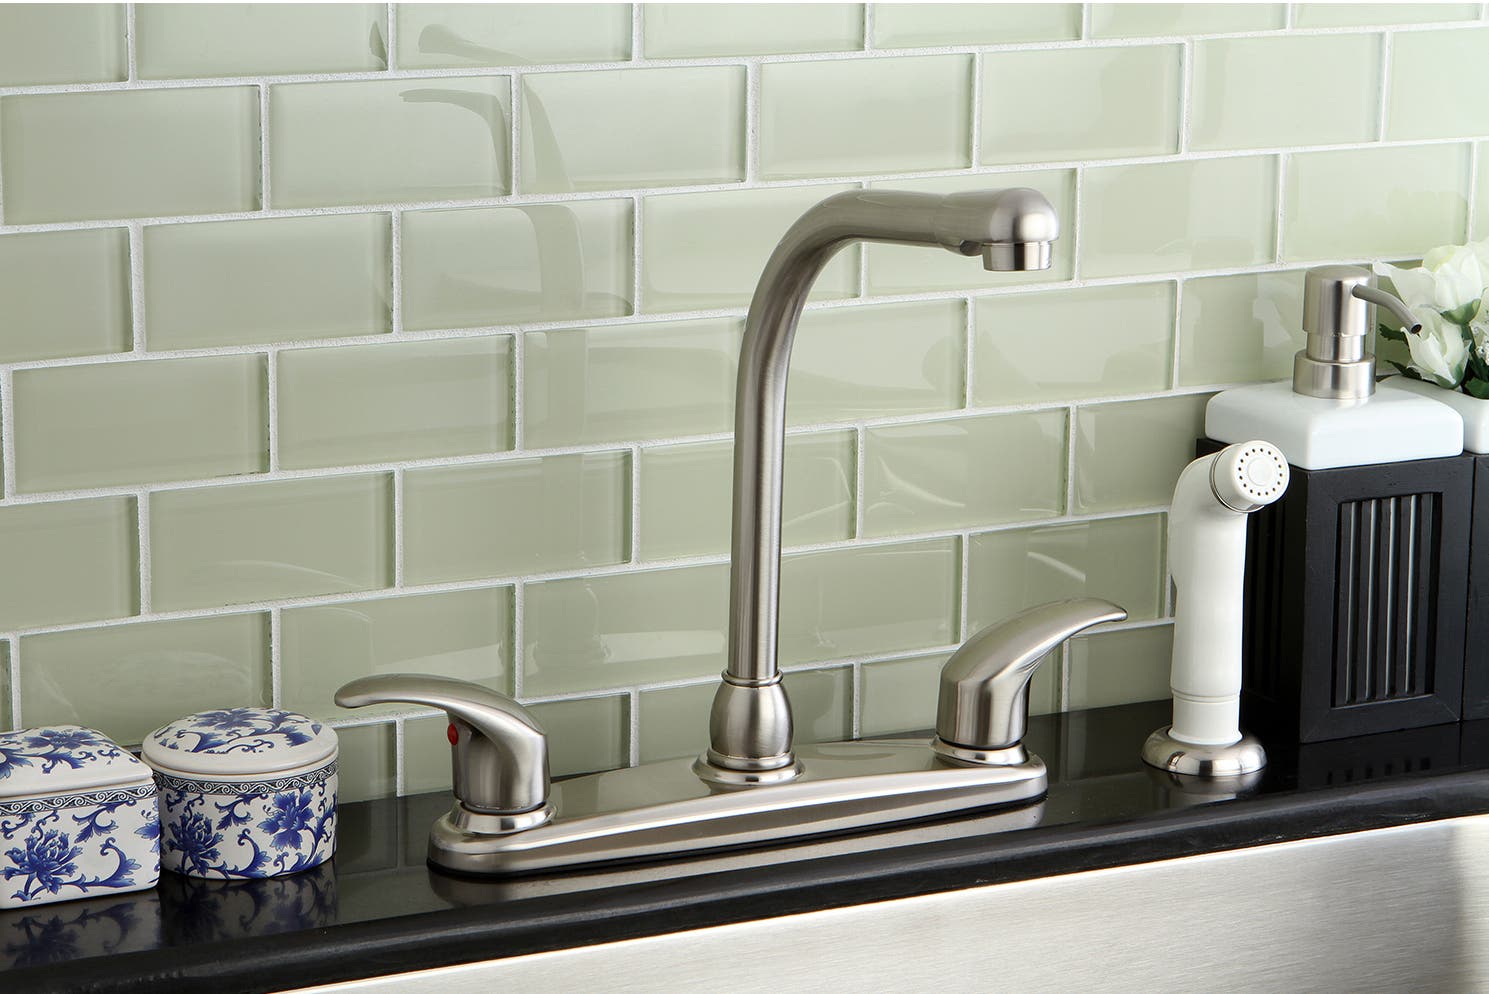 New Legacy Kitchen Faucets Make Bold Statement, KB71xLL Family